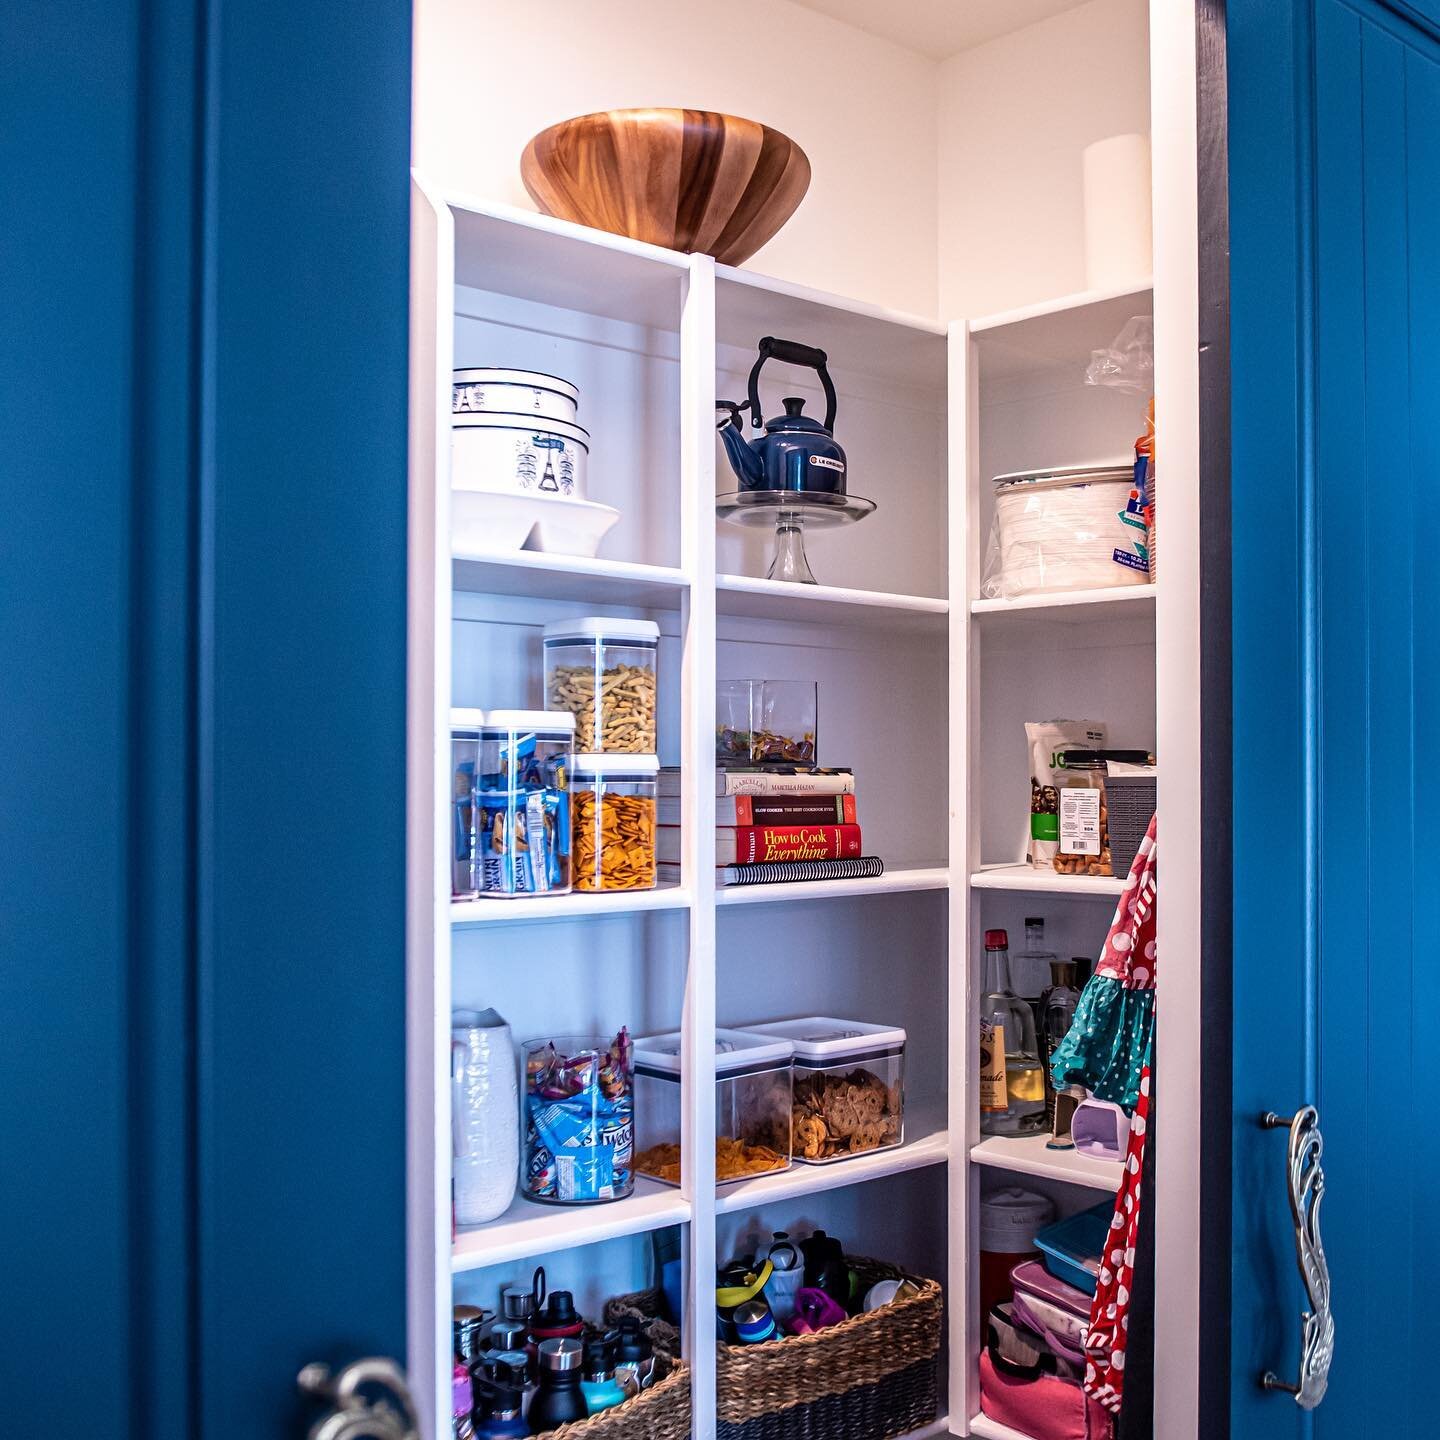 An organized pantry is the key to our heart 😍 See more of the Norterra New Build on our website www.soleilstudiodesign.com
.
.
.
.
.
.
#brightathome #soleilstudiodesign #soleil #az #interiordesign #design #interiordesignaz #remodel #pantry #pantrygo